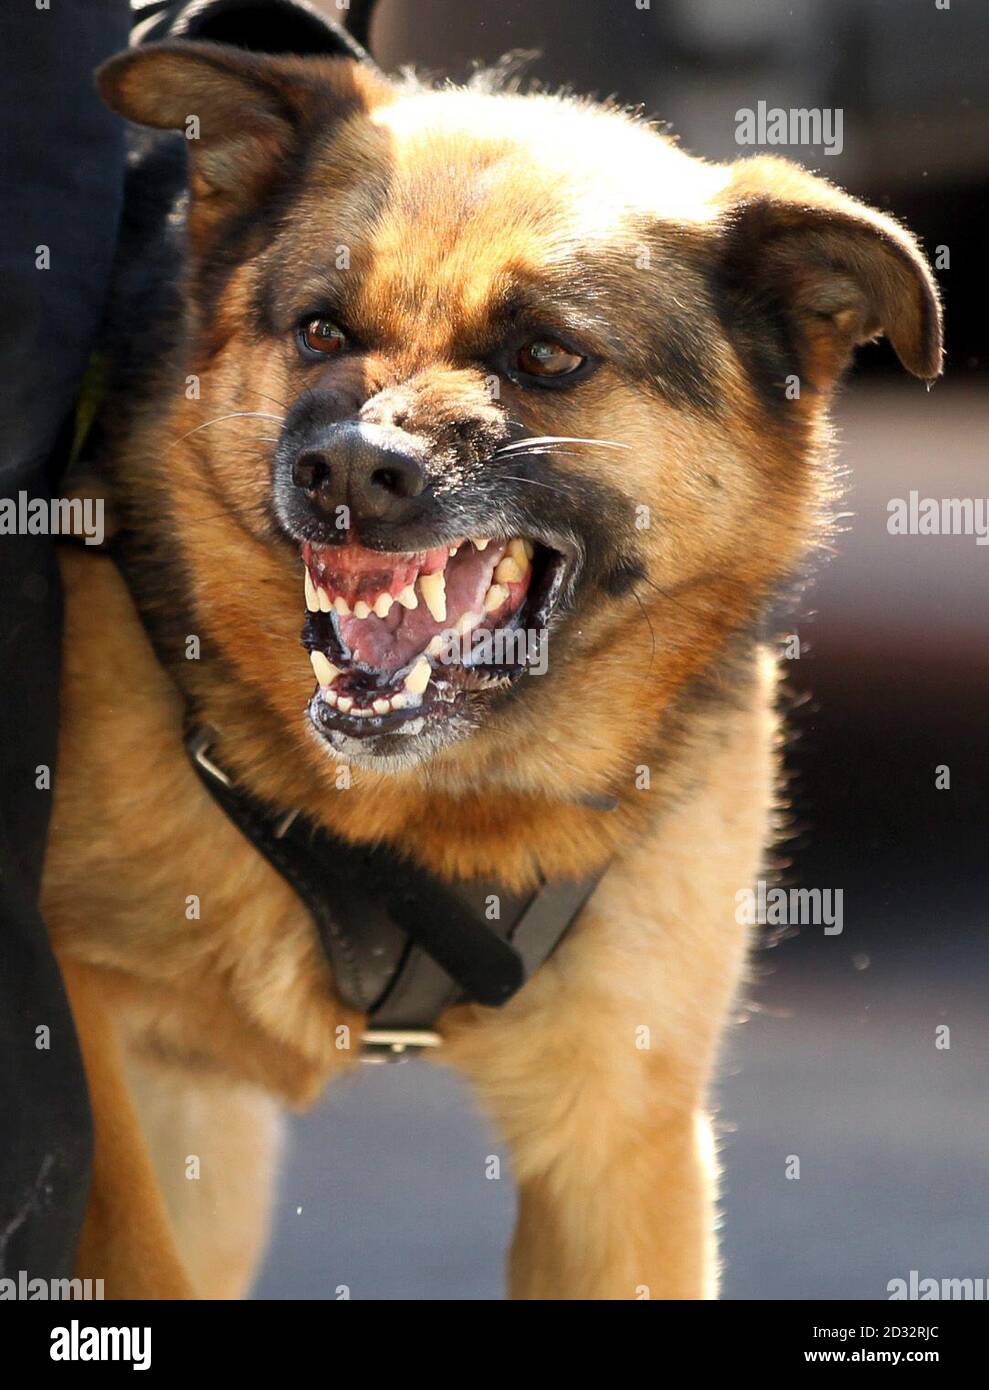 A police dog barking during a demonstration on Whitehall in London. Stock Photo